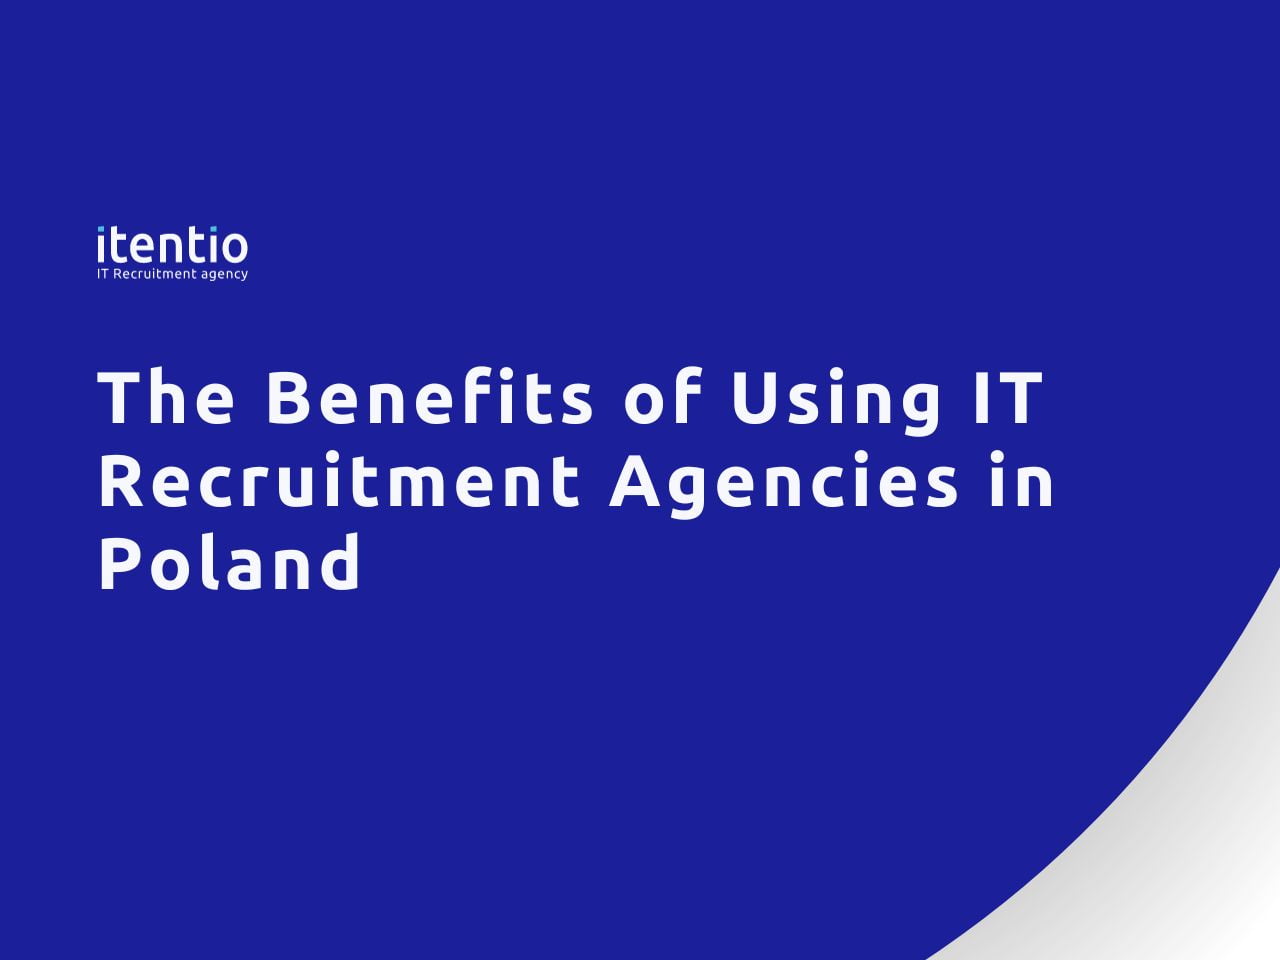 The Benefits of Using IT Recruitment Agencies in Poland